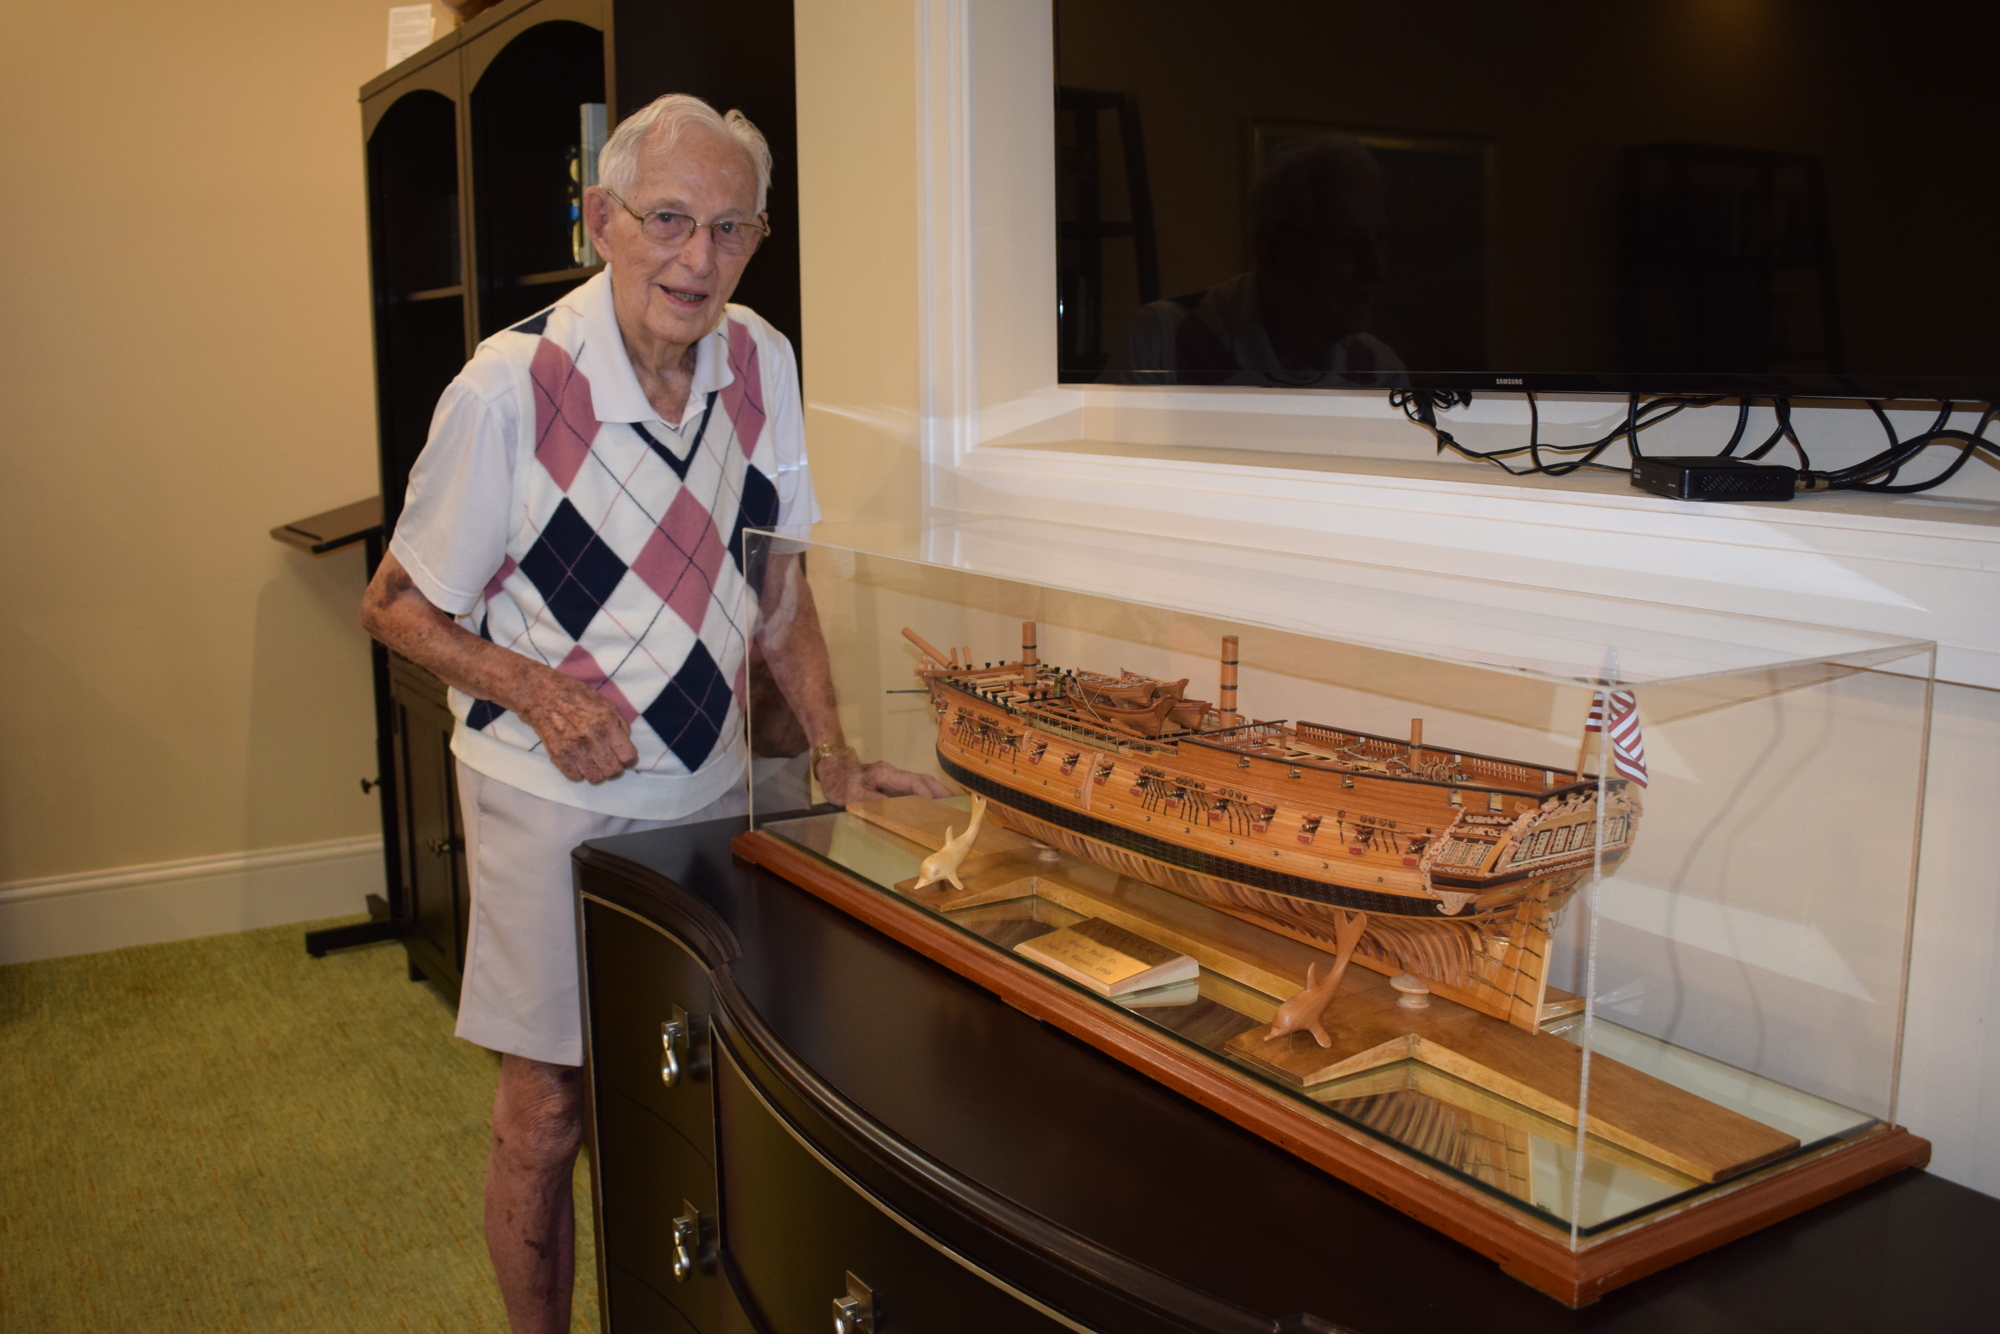 Jack Wagner built a model of the Confederacy that now is a conversation piece at The Sheridan at Lakewood Ranch.